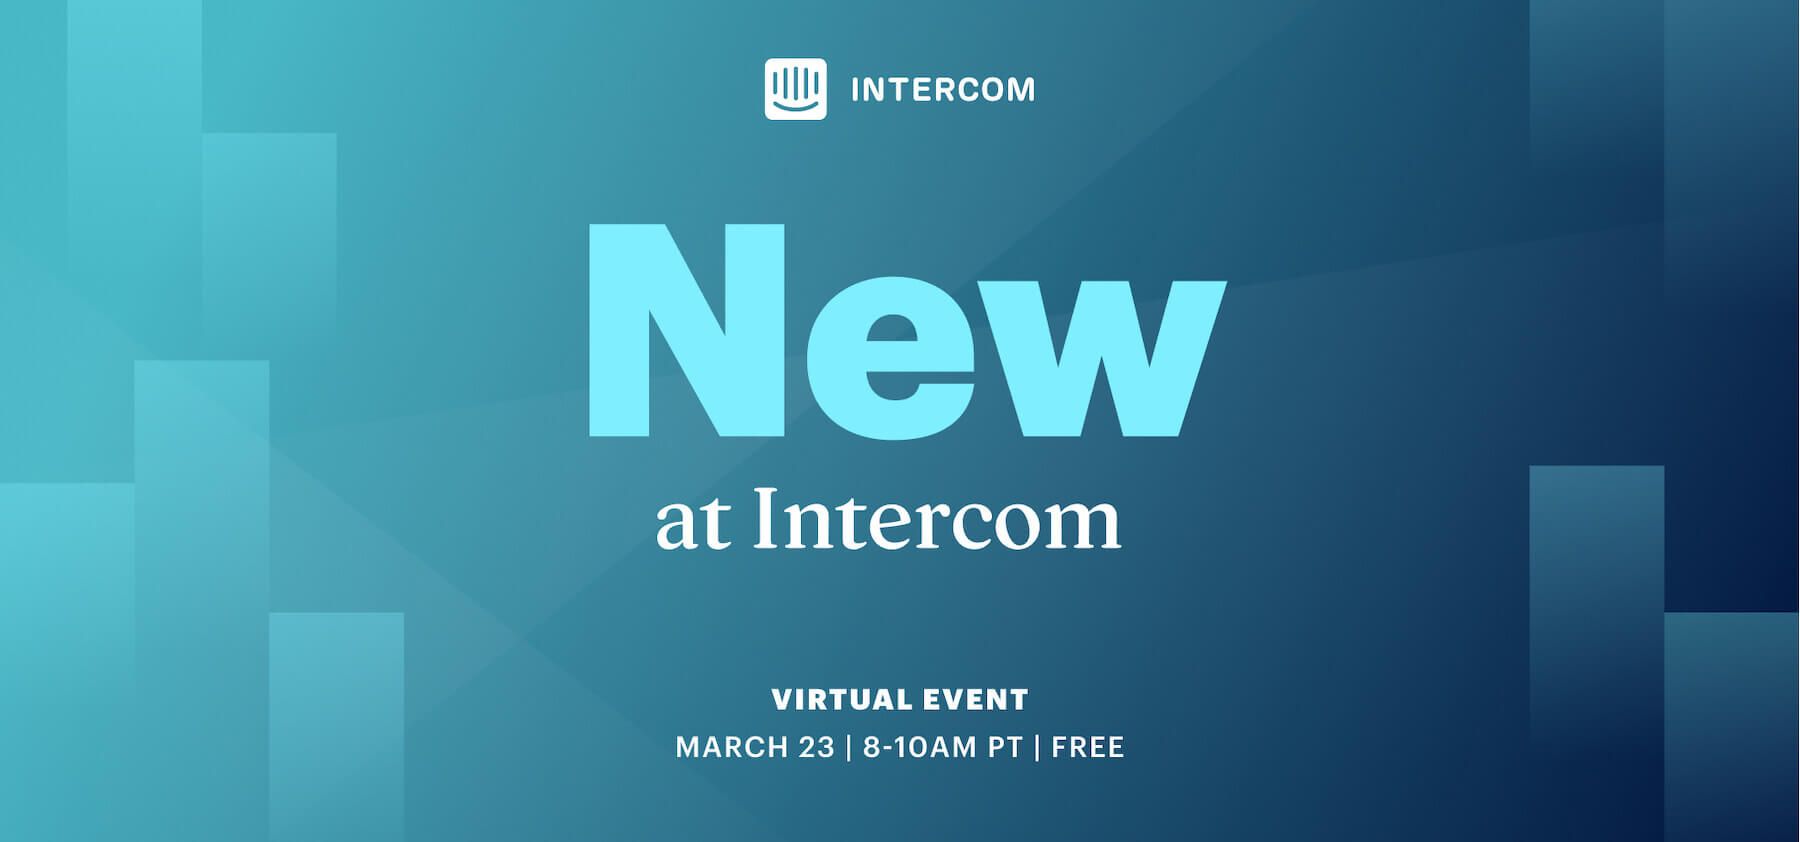 Introducing “New at Intercom” – our first virtual launch event